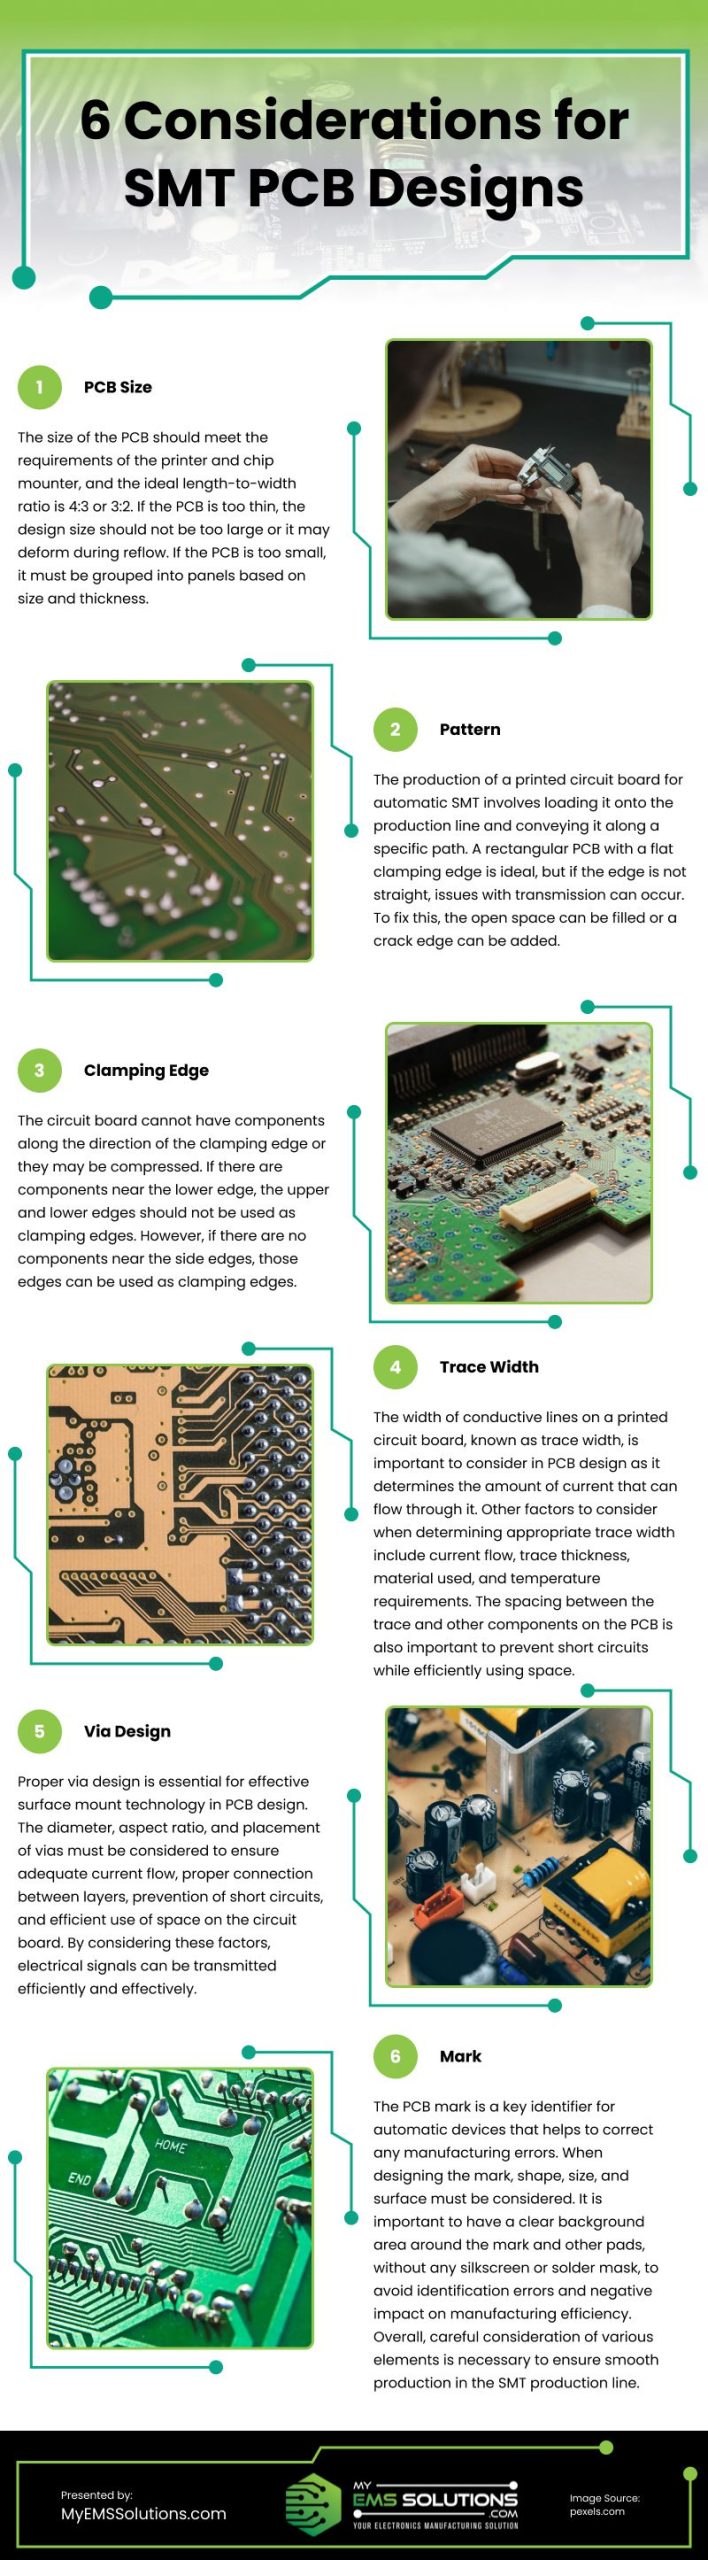 6 Considerations for SMT PCB Designs Infographic